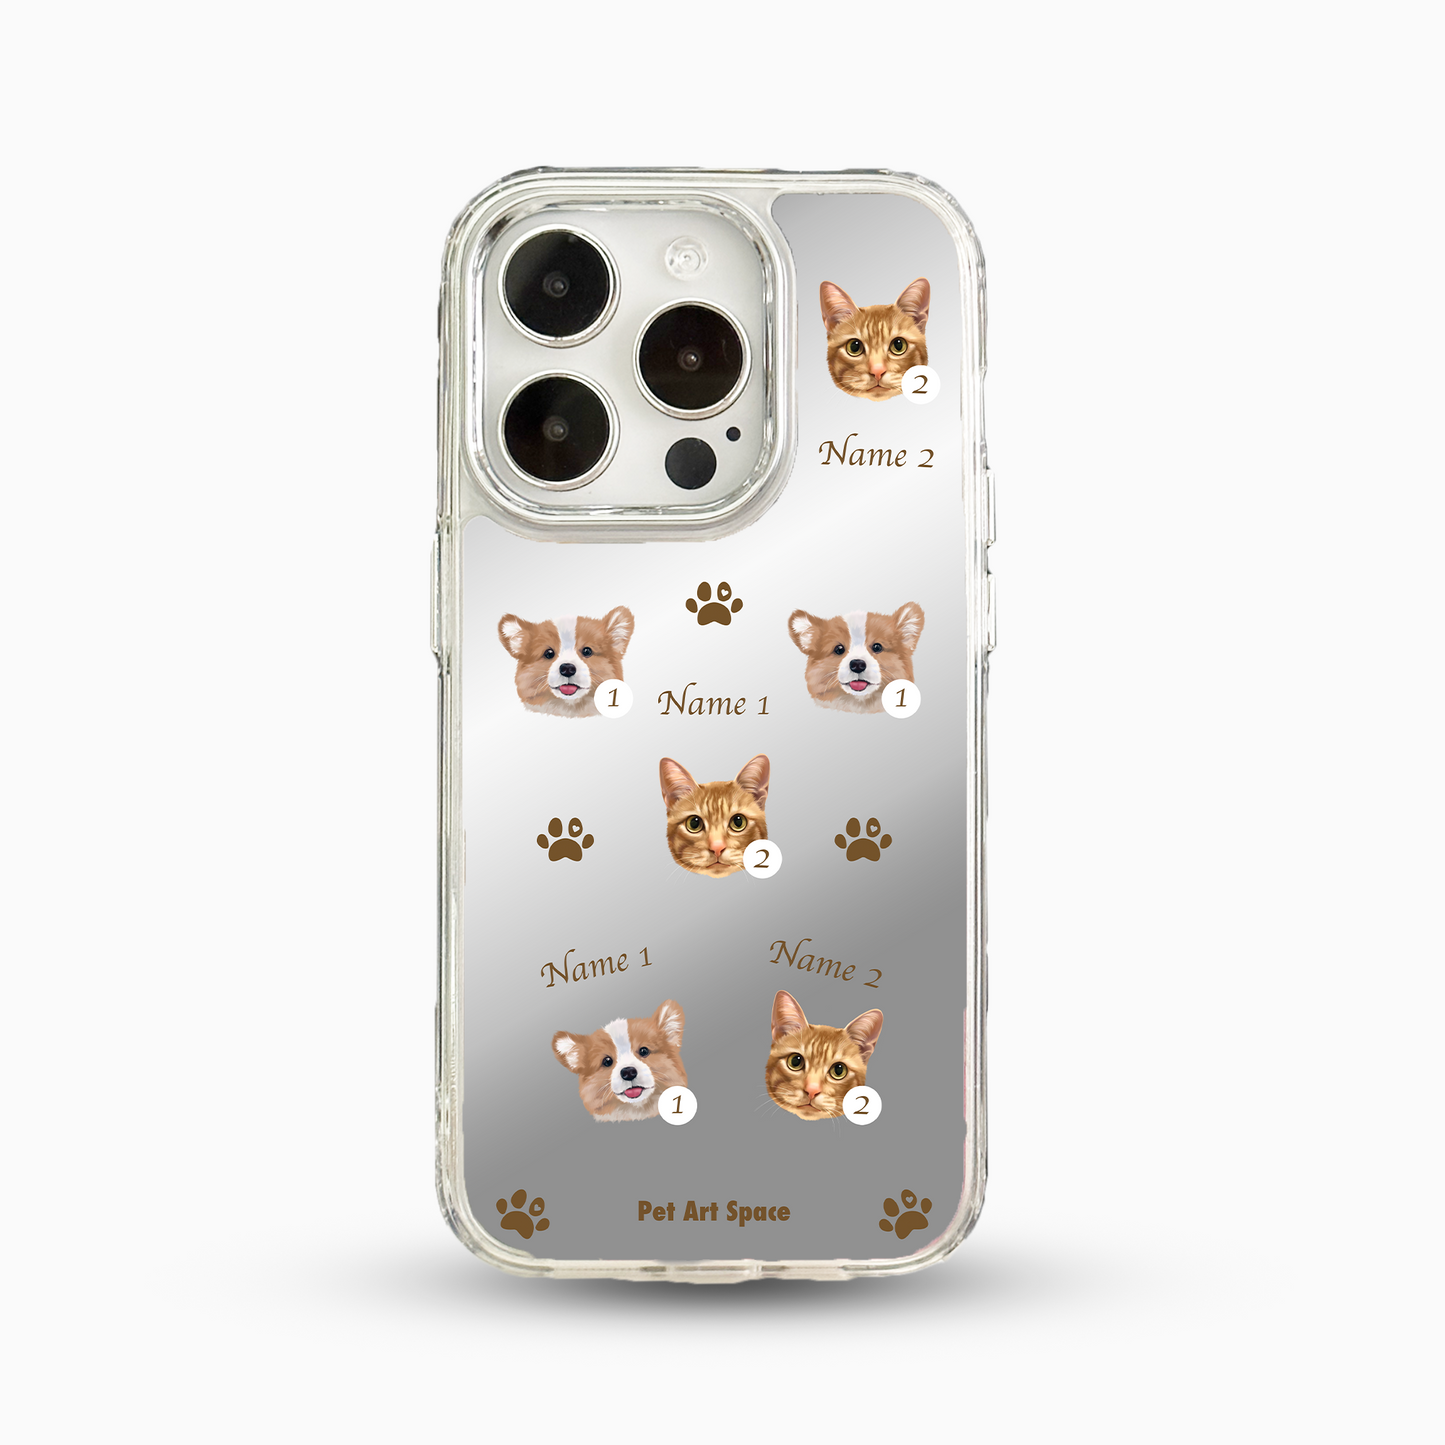 Paws A for 2 Pets - Mirror Case C